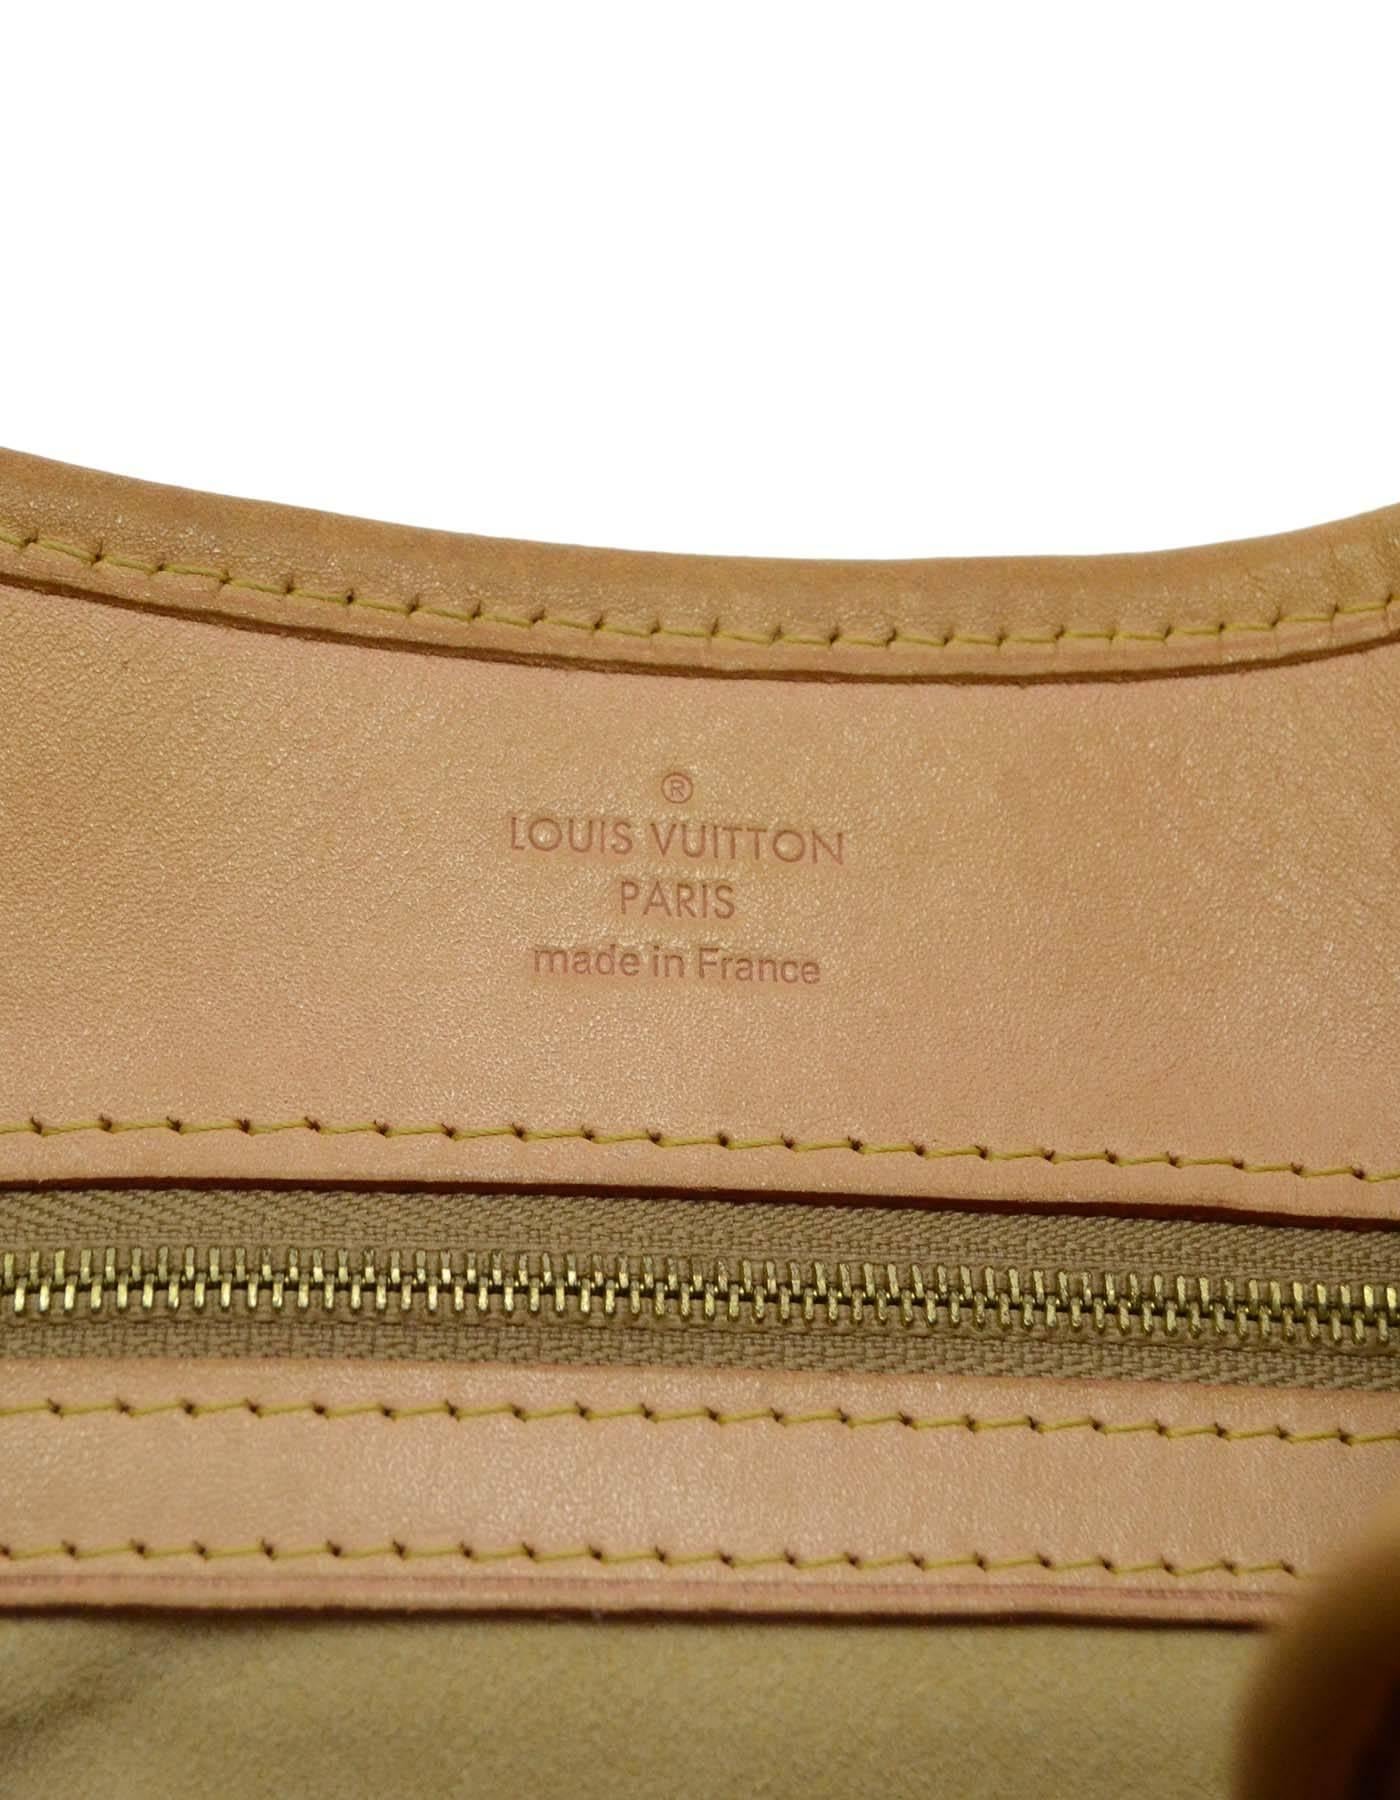 Women's Louis Vuitton Monogram Etoile Shopper Tote with GHW and Dust Bag